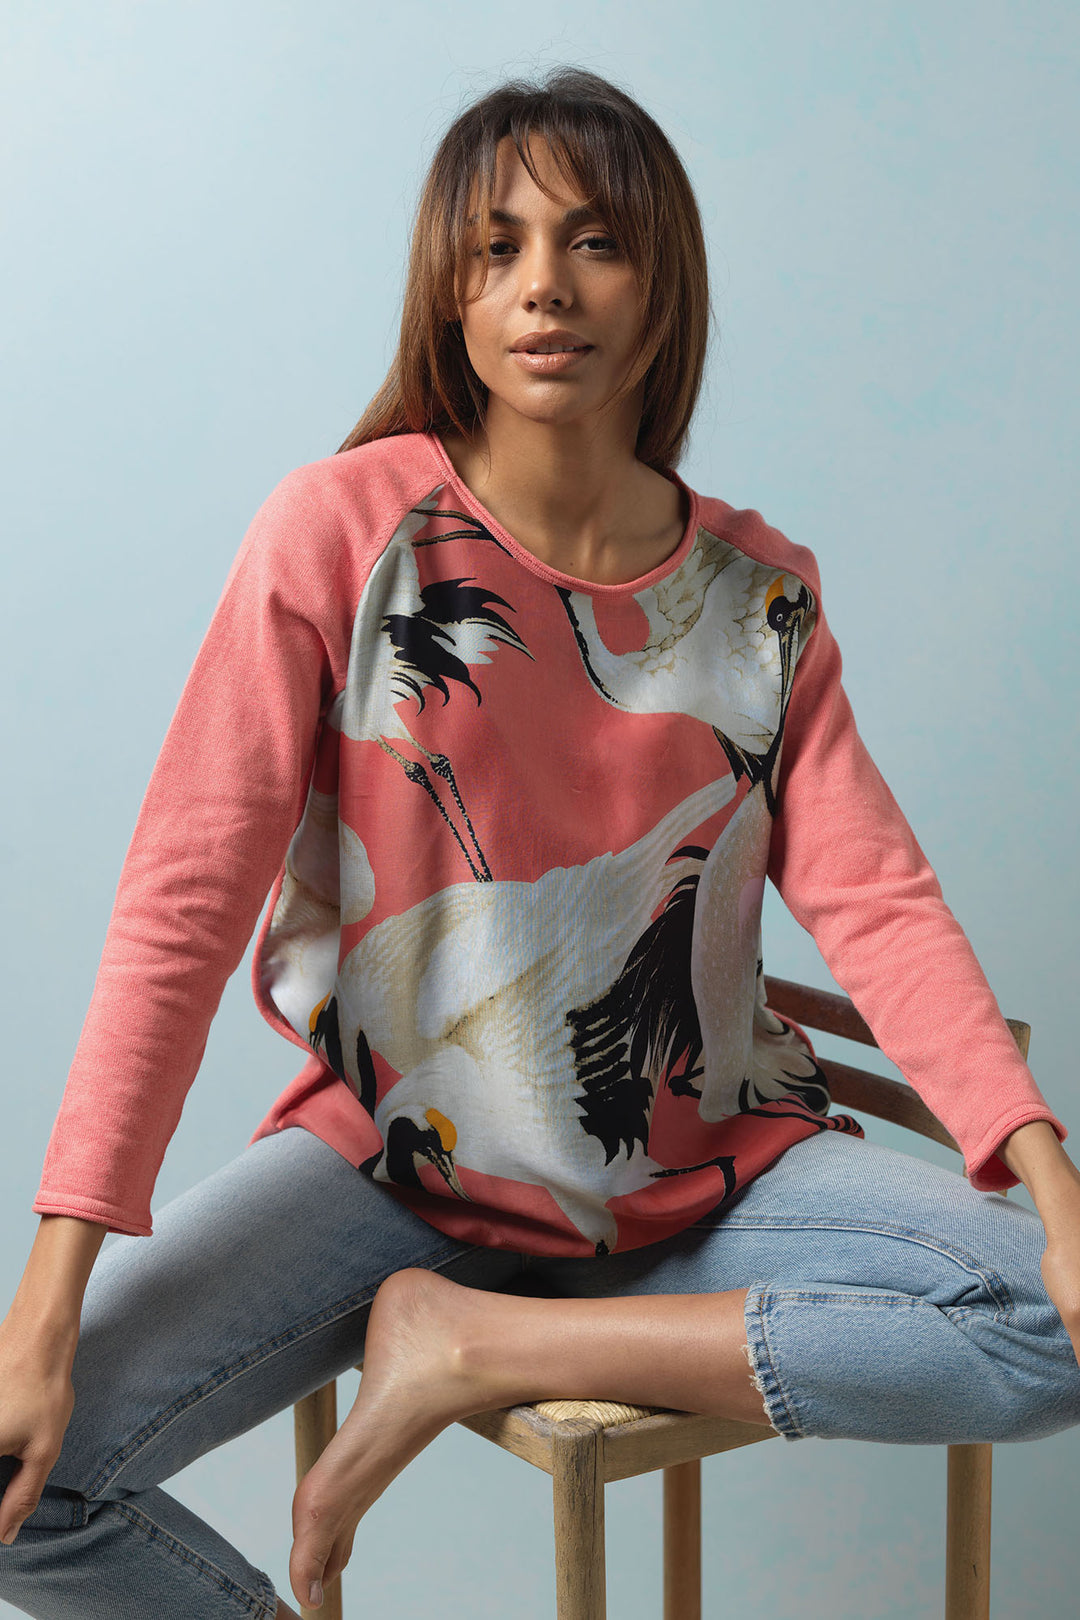 One Hundred Stars Stork Crane Lipstick Pink Cotton Jumper features a black and white stork print on the front, on a vivid pink background. 